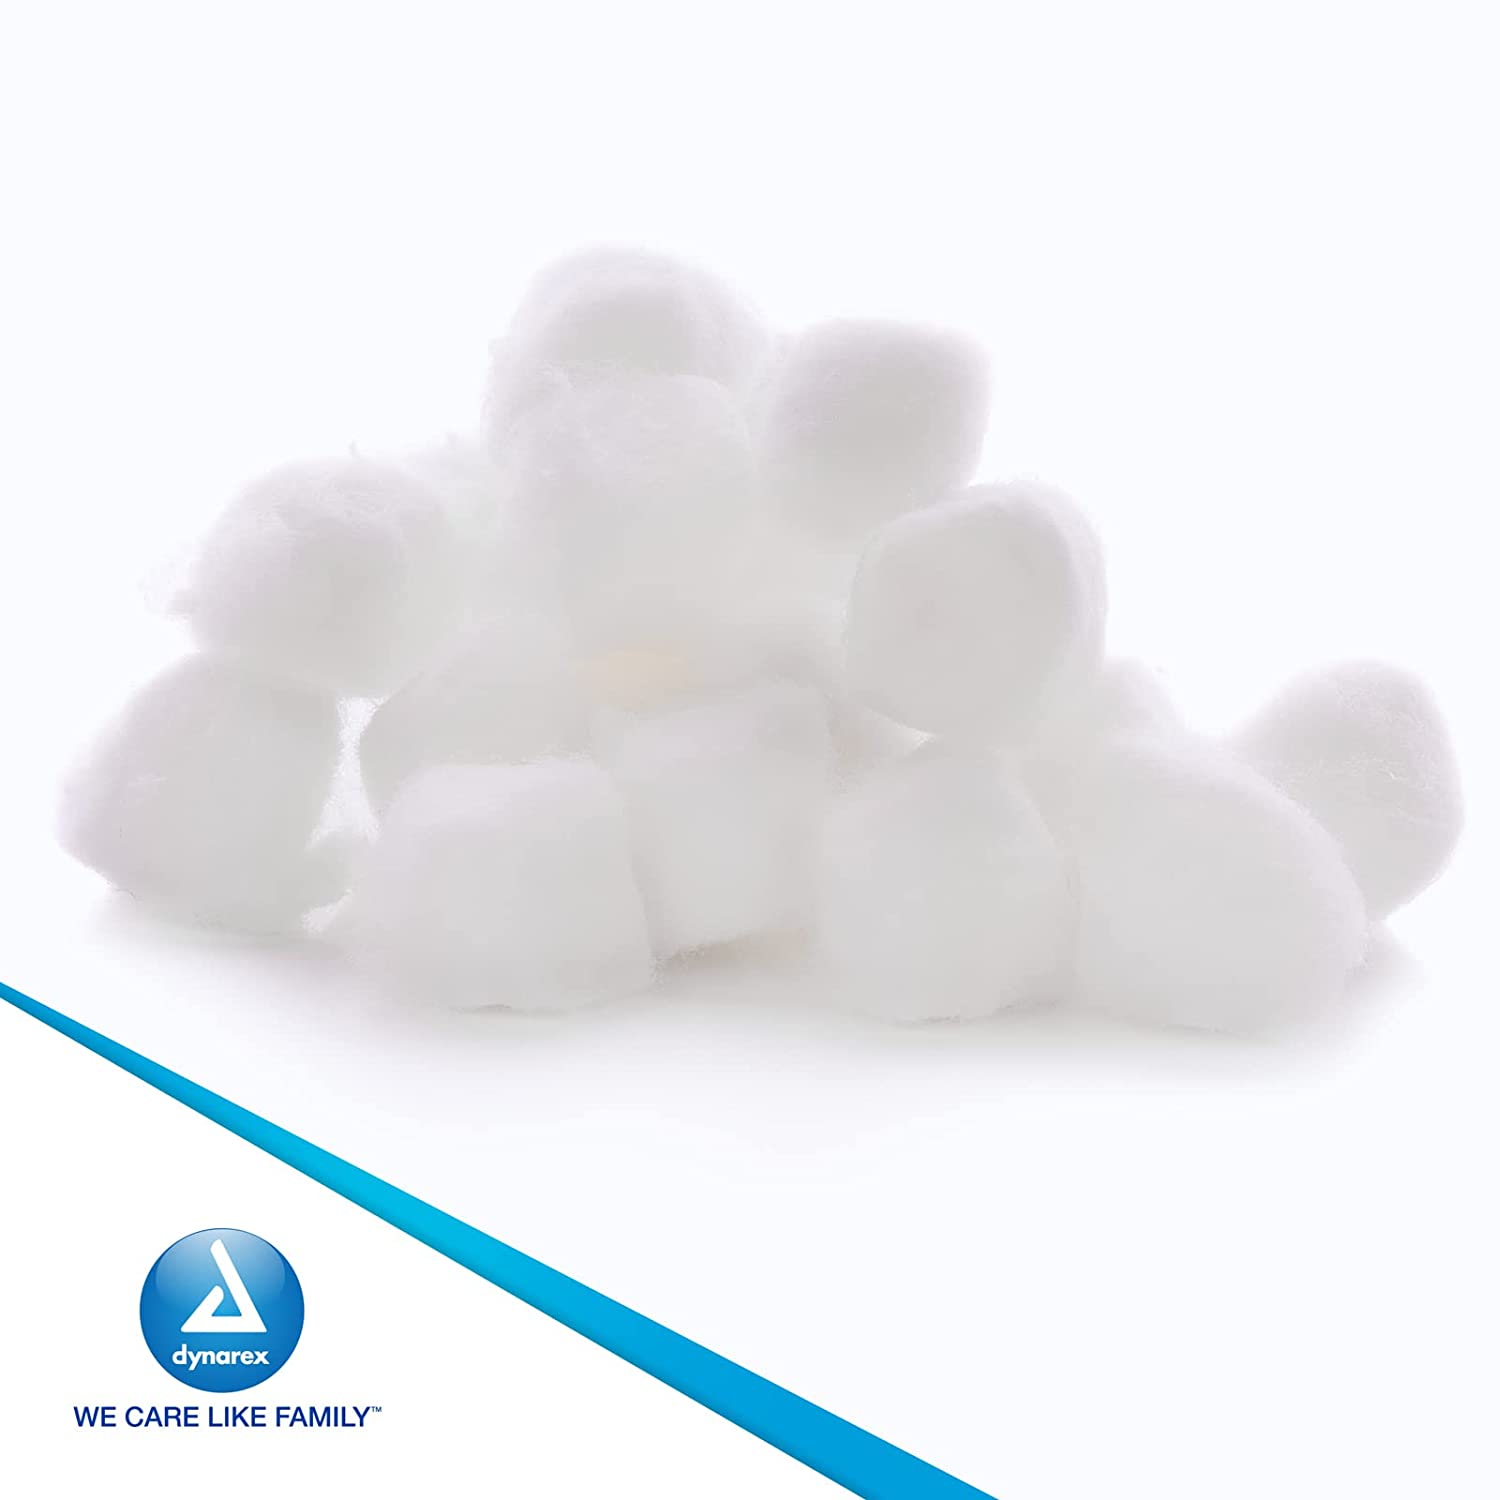 Dynarex Cotton Balls, Non-Sterile and Large Sized, Latex-Free and Abso